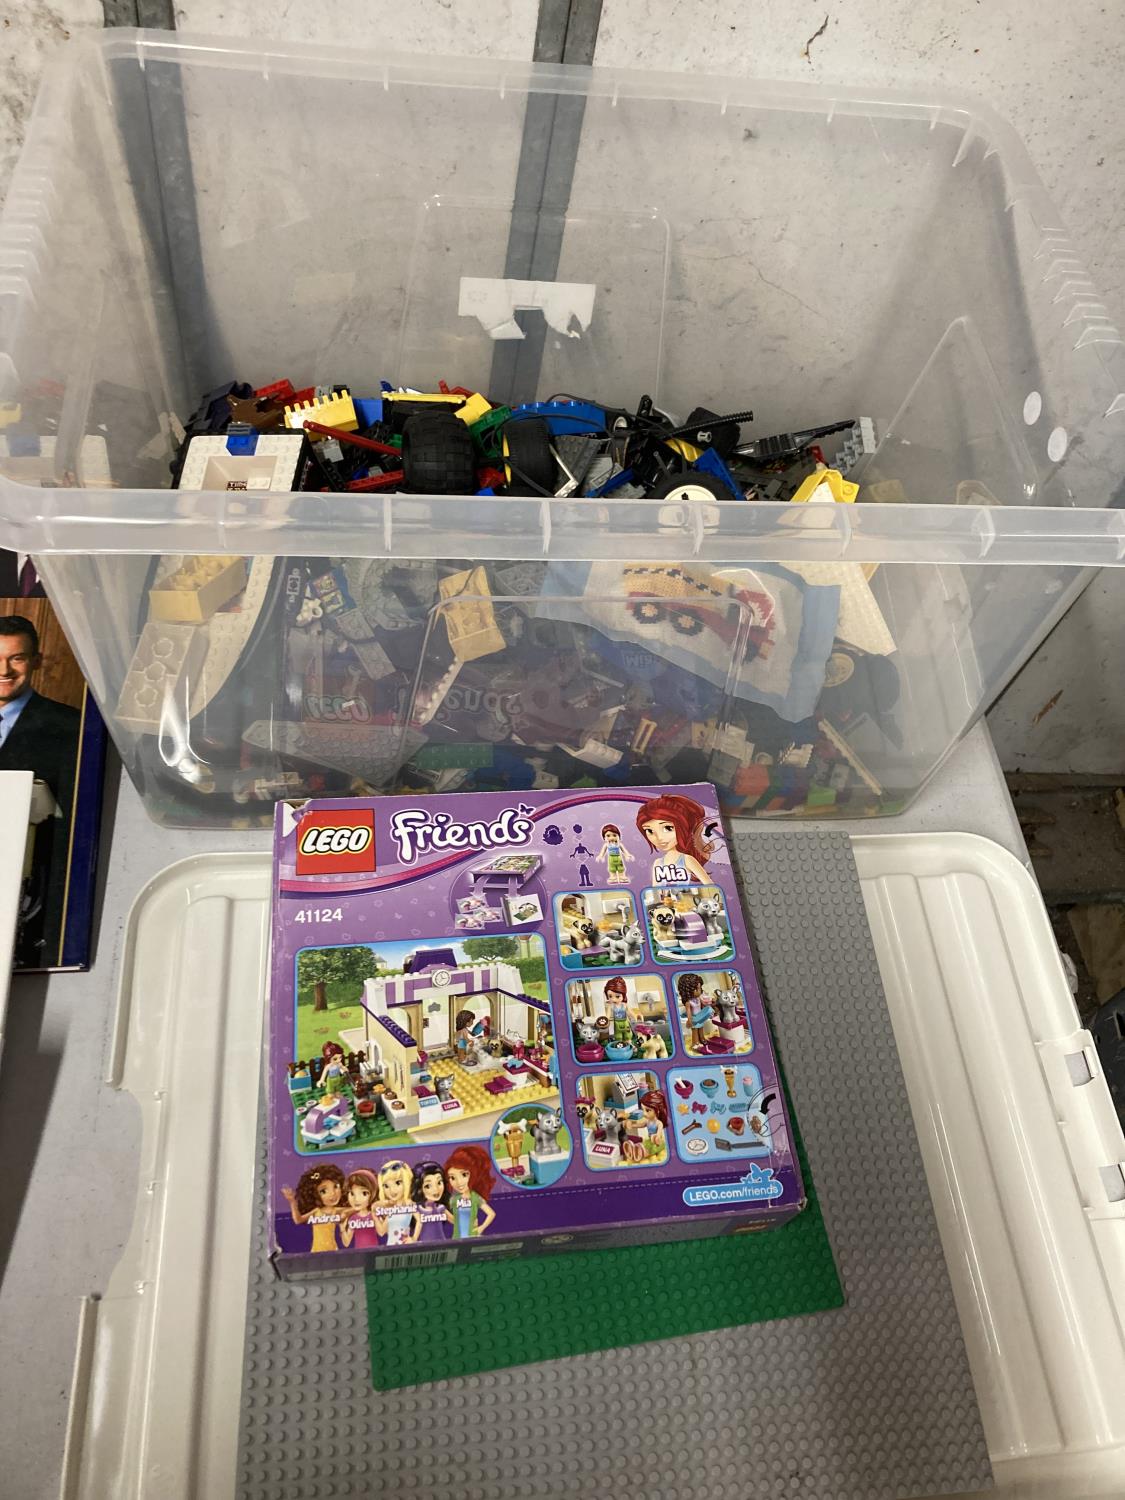 A LARGE PLASTIC BOX OF LEGO TOGETHER WITH A BOXED FRIEND'S LEGO SET